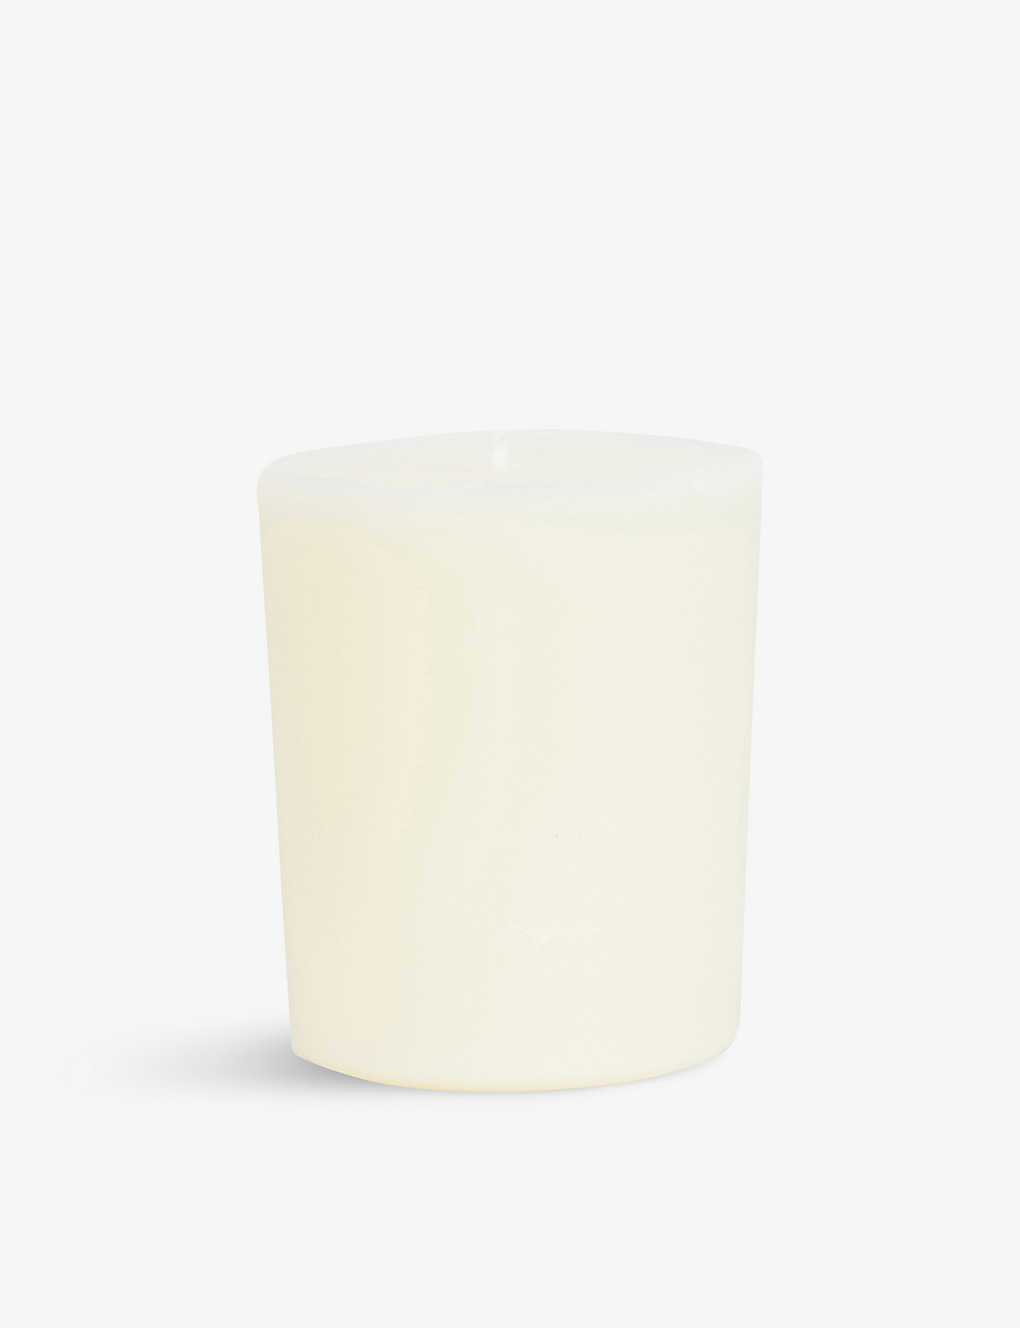 D'orsay 02:45 Enfin Seuls Scented Candle Refill 250g